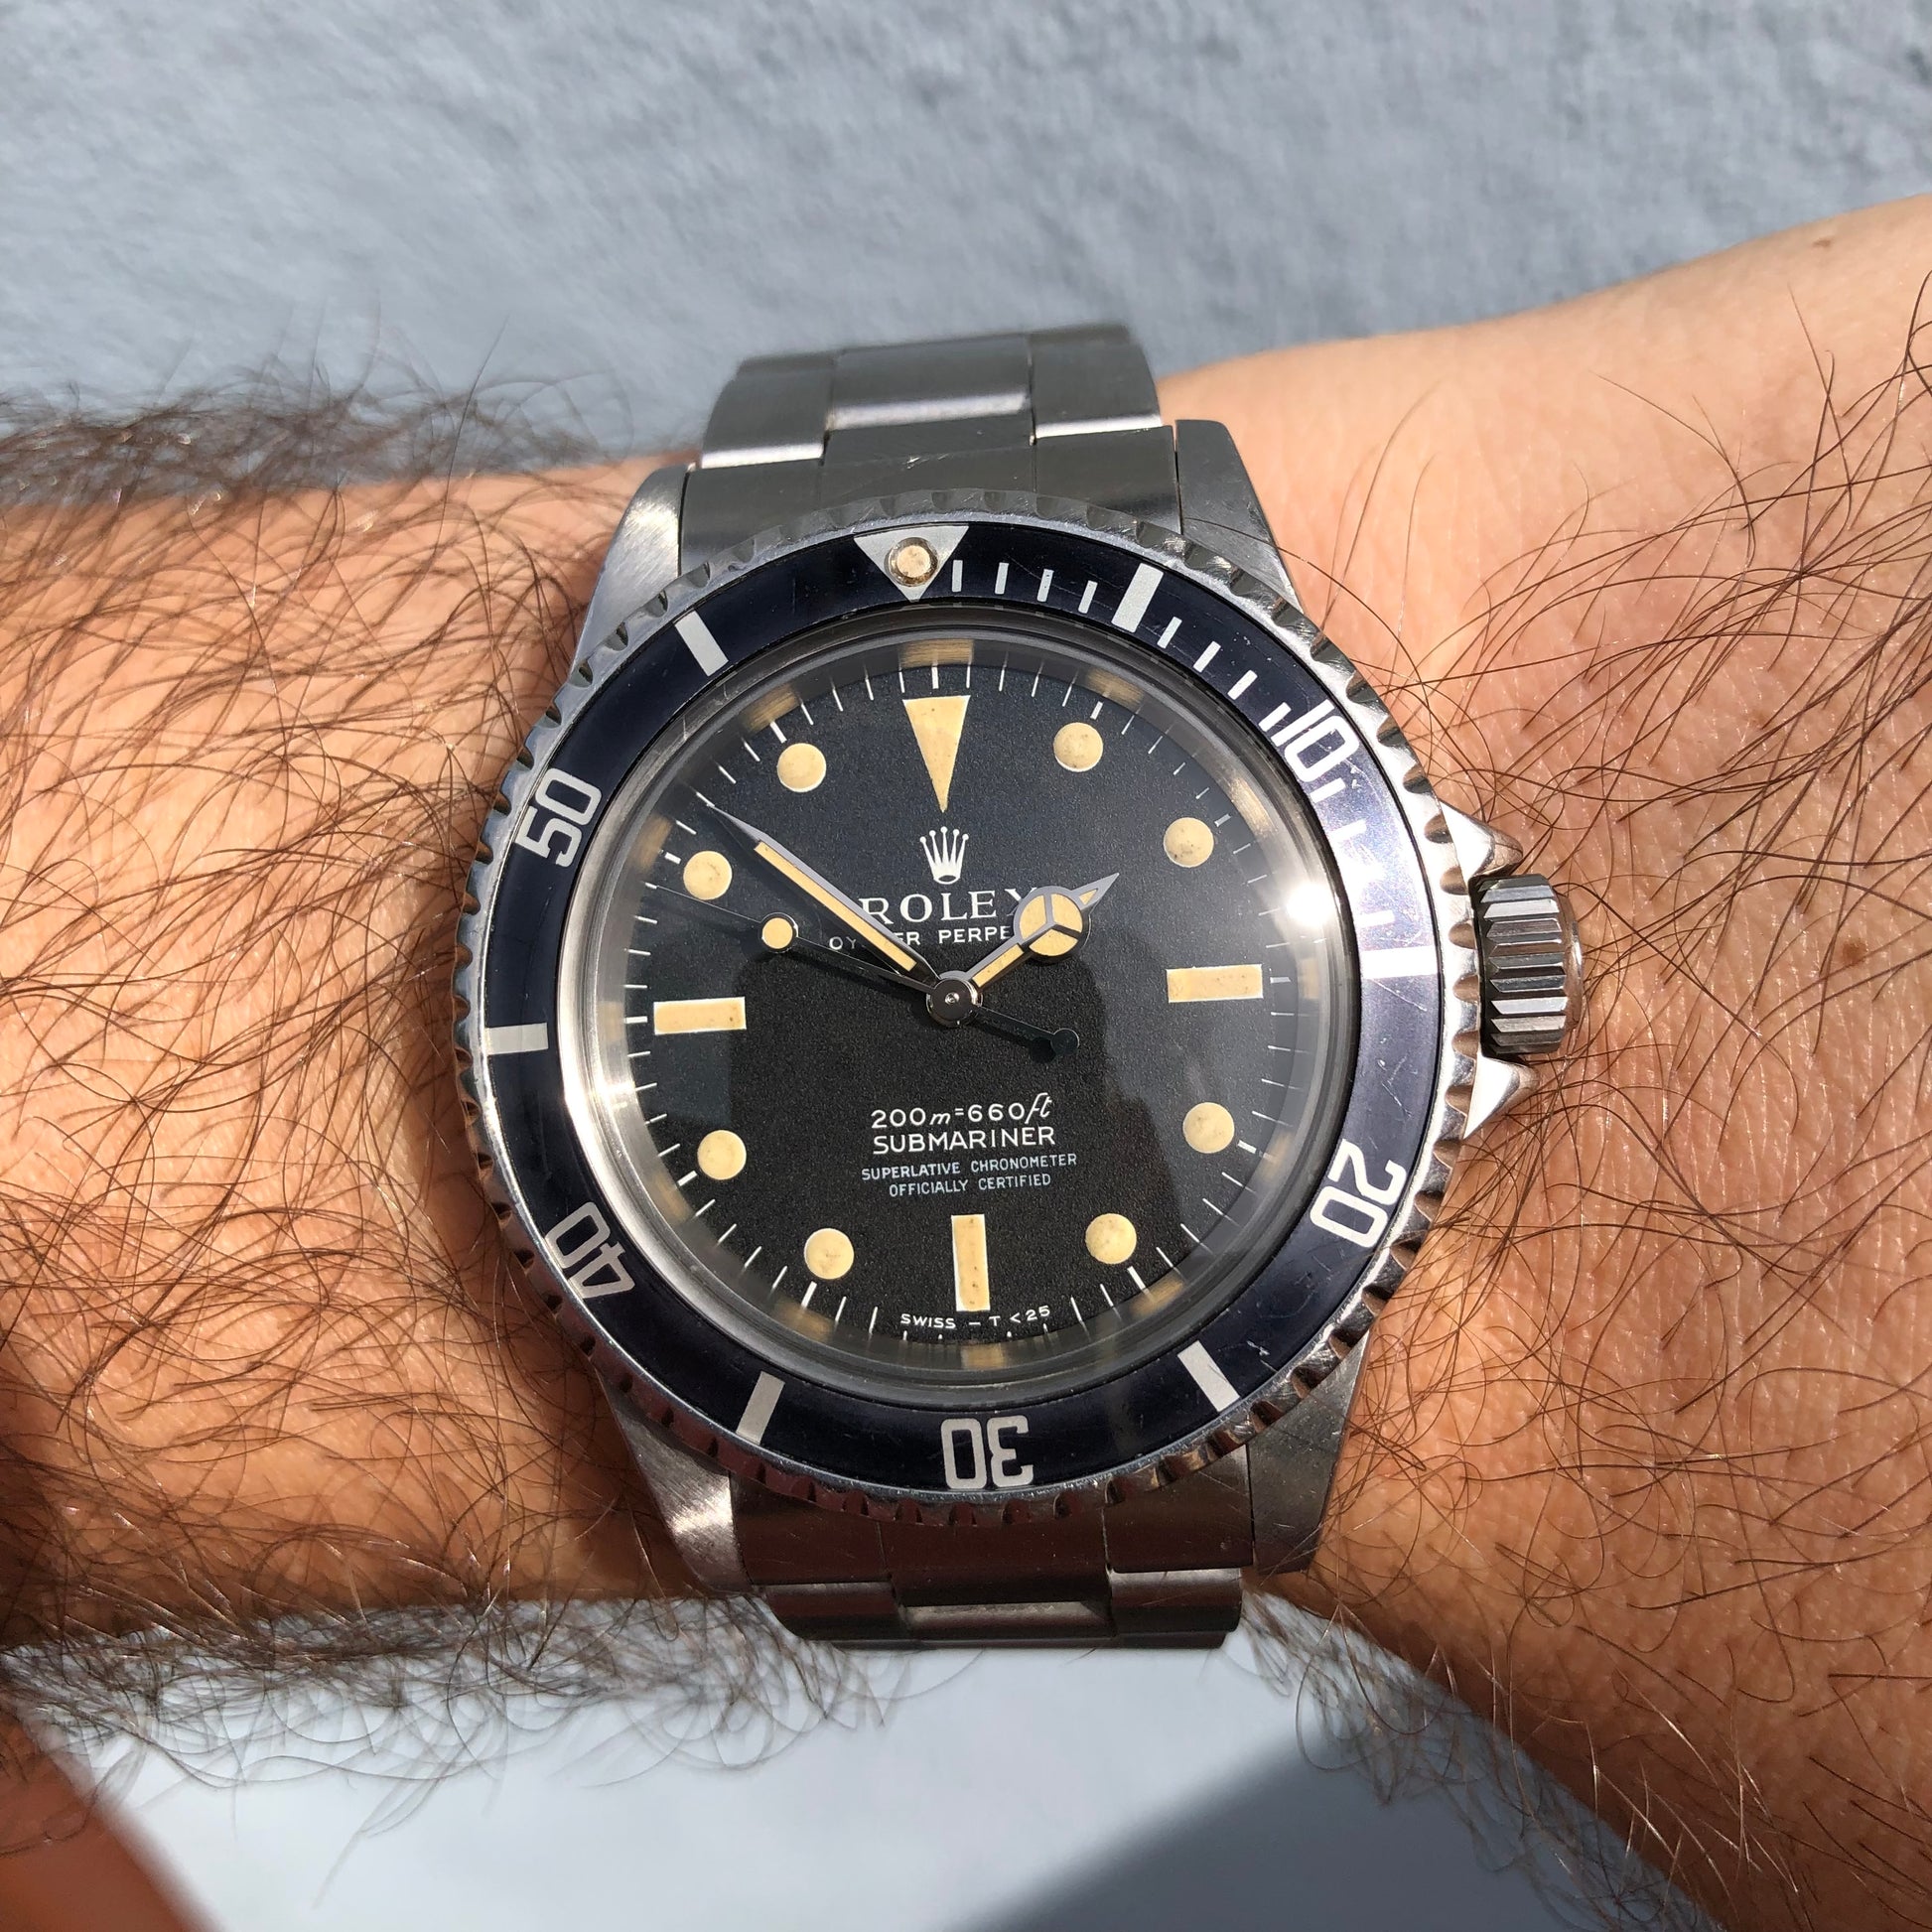 Rolex Submariner Ref. 5512/5513 Stainless Steel, Automatic, with